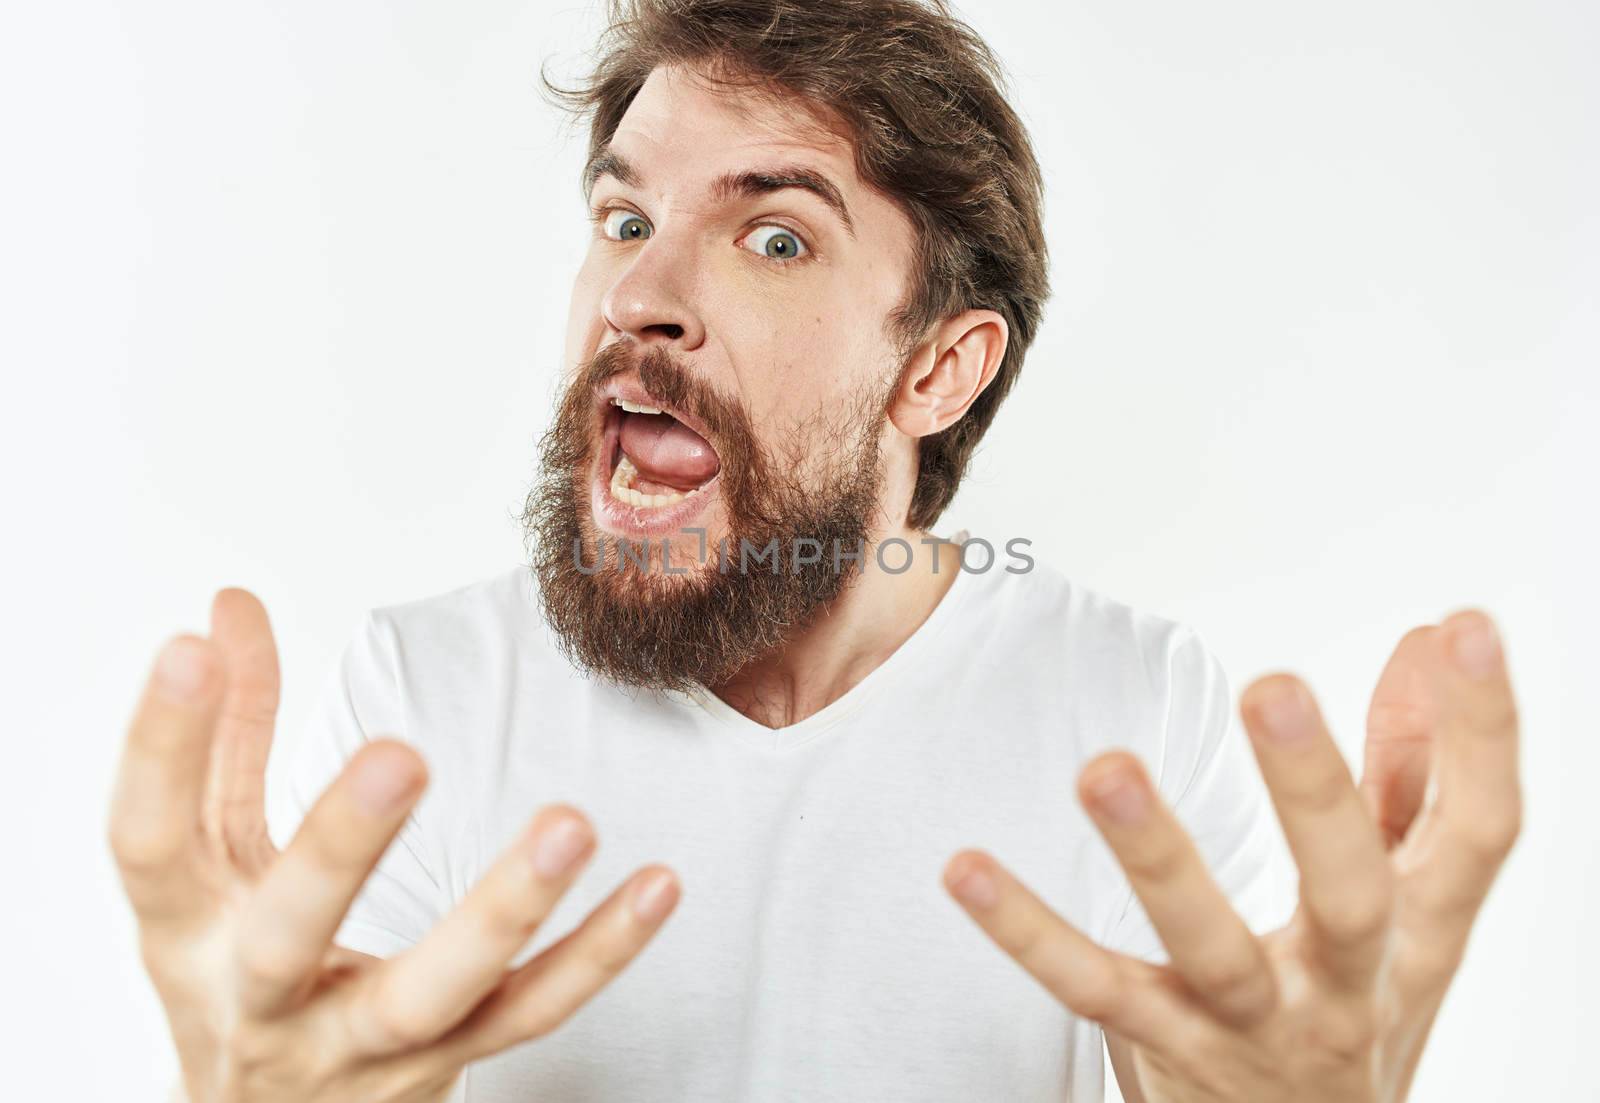 Emotional man on a white background in a T-shirt shows a gesture with his hands. High quality photo